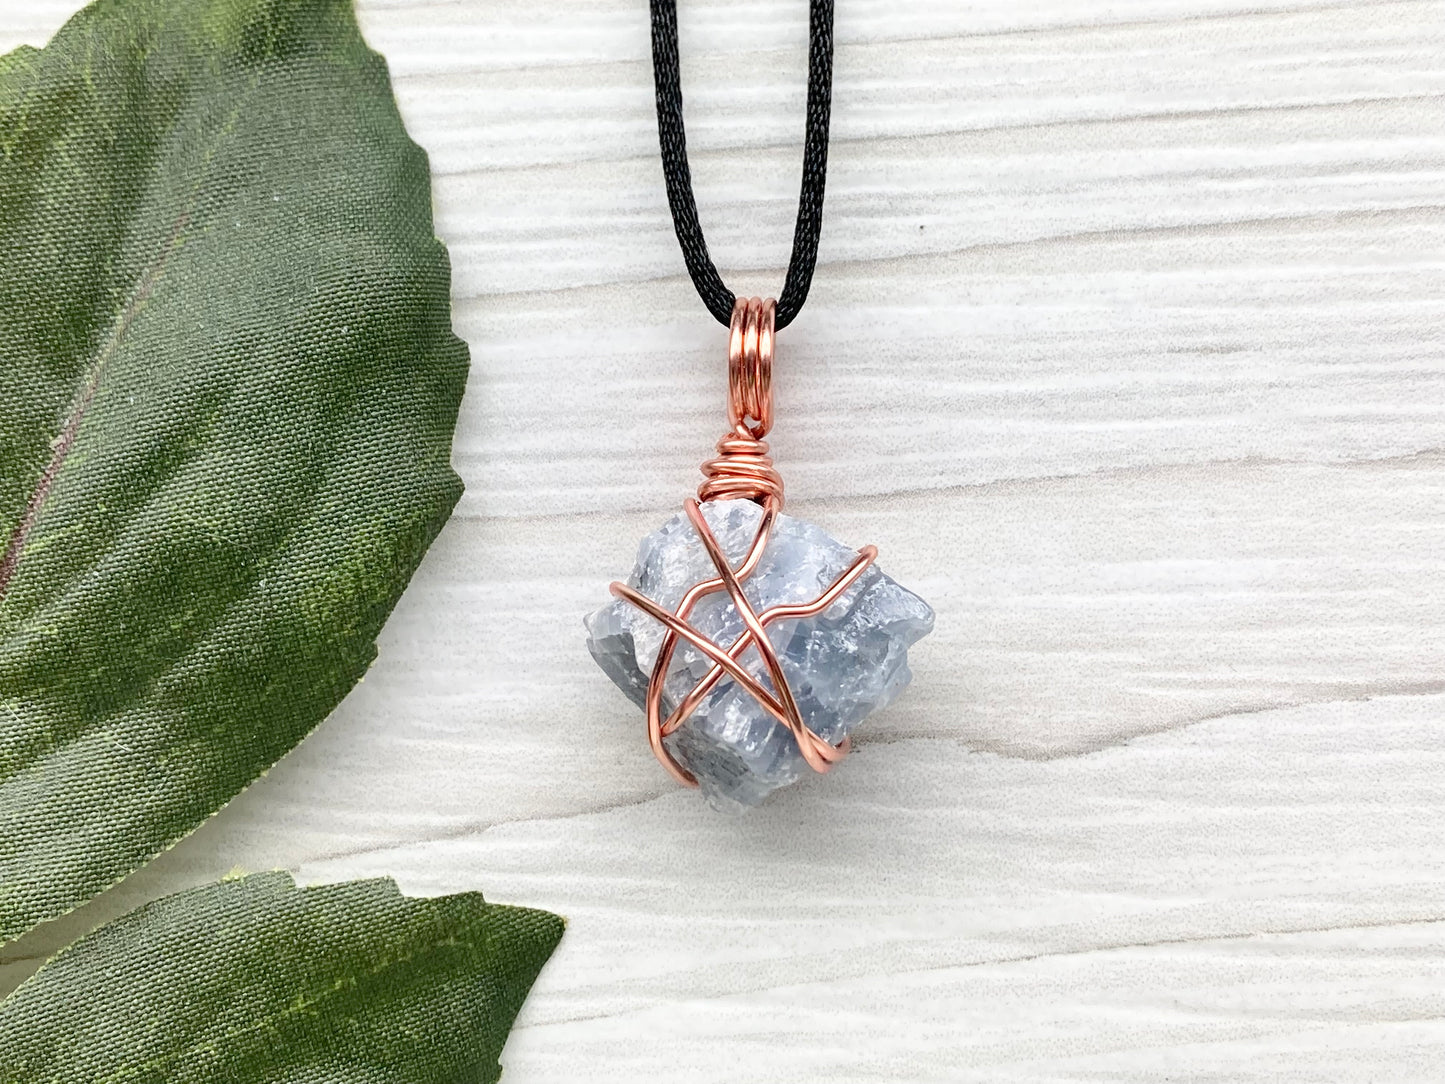 Blue Calcite Necklace. Copper Wire Wrapped Raw Crystal Pendant. Handmade New Age Jewelry.  Comes On A Black Chain. Wiccan Pagan Style Jewelry.